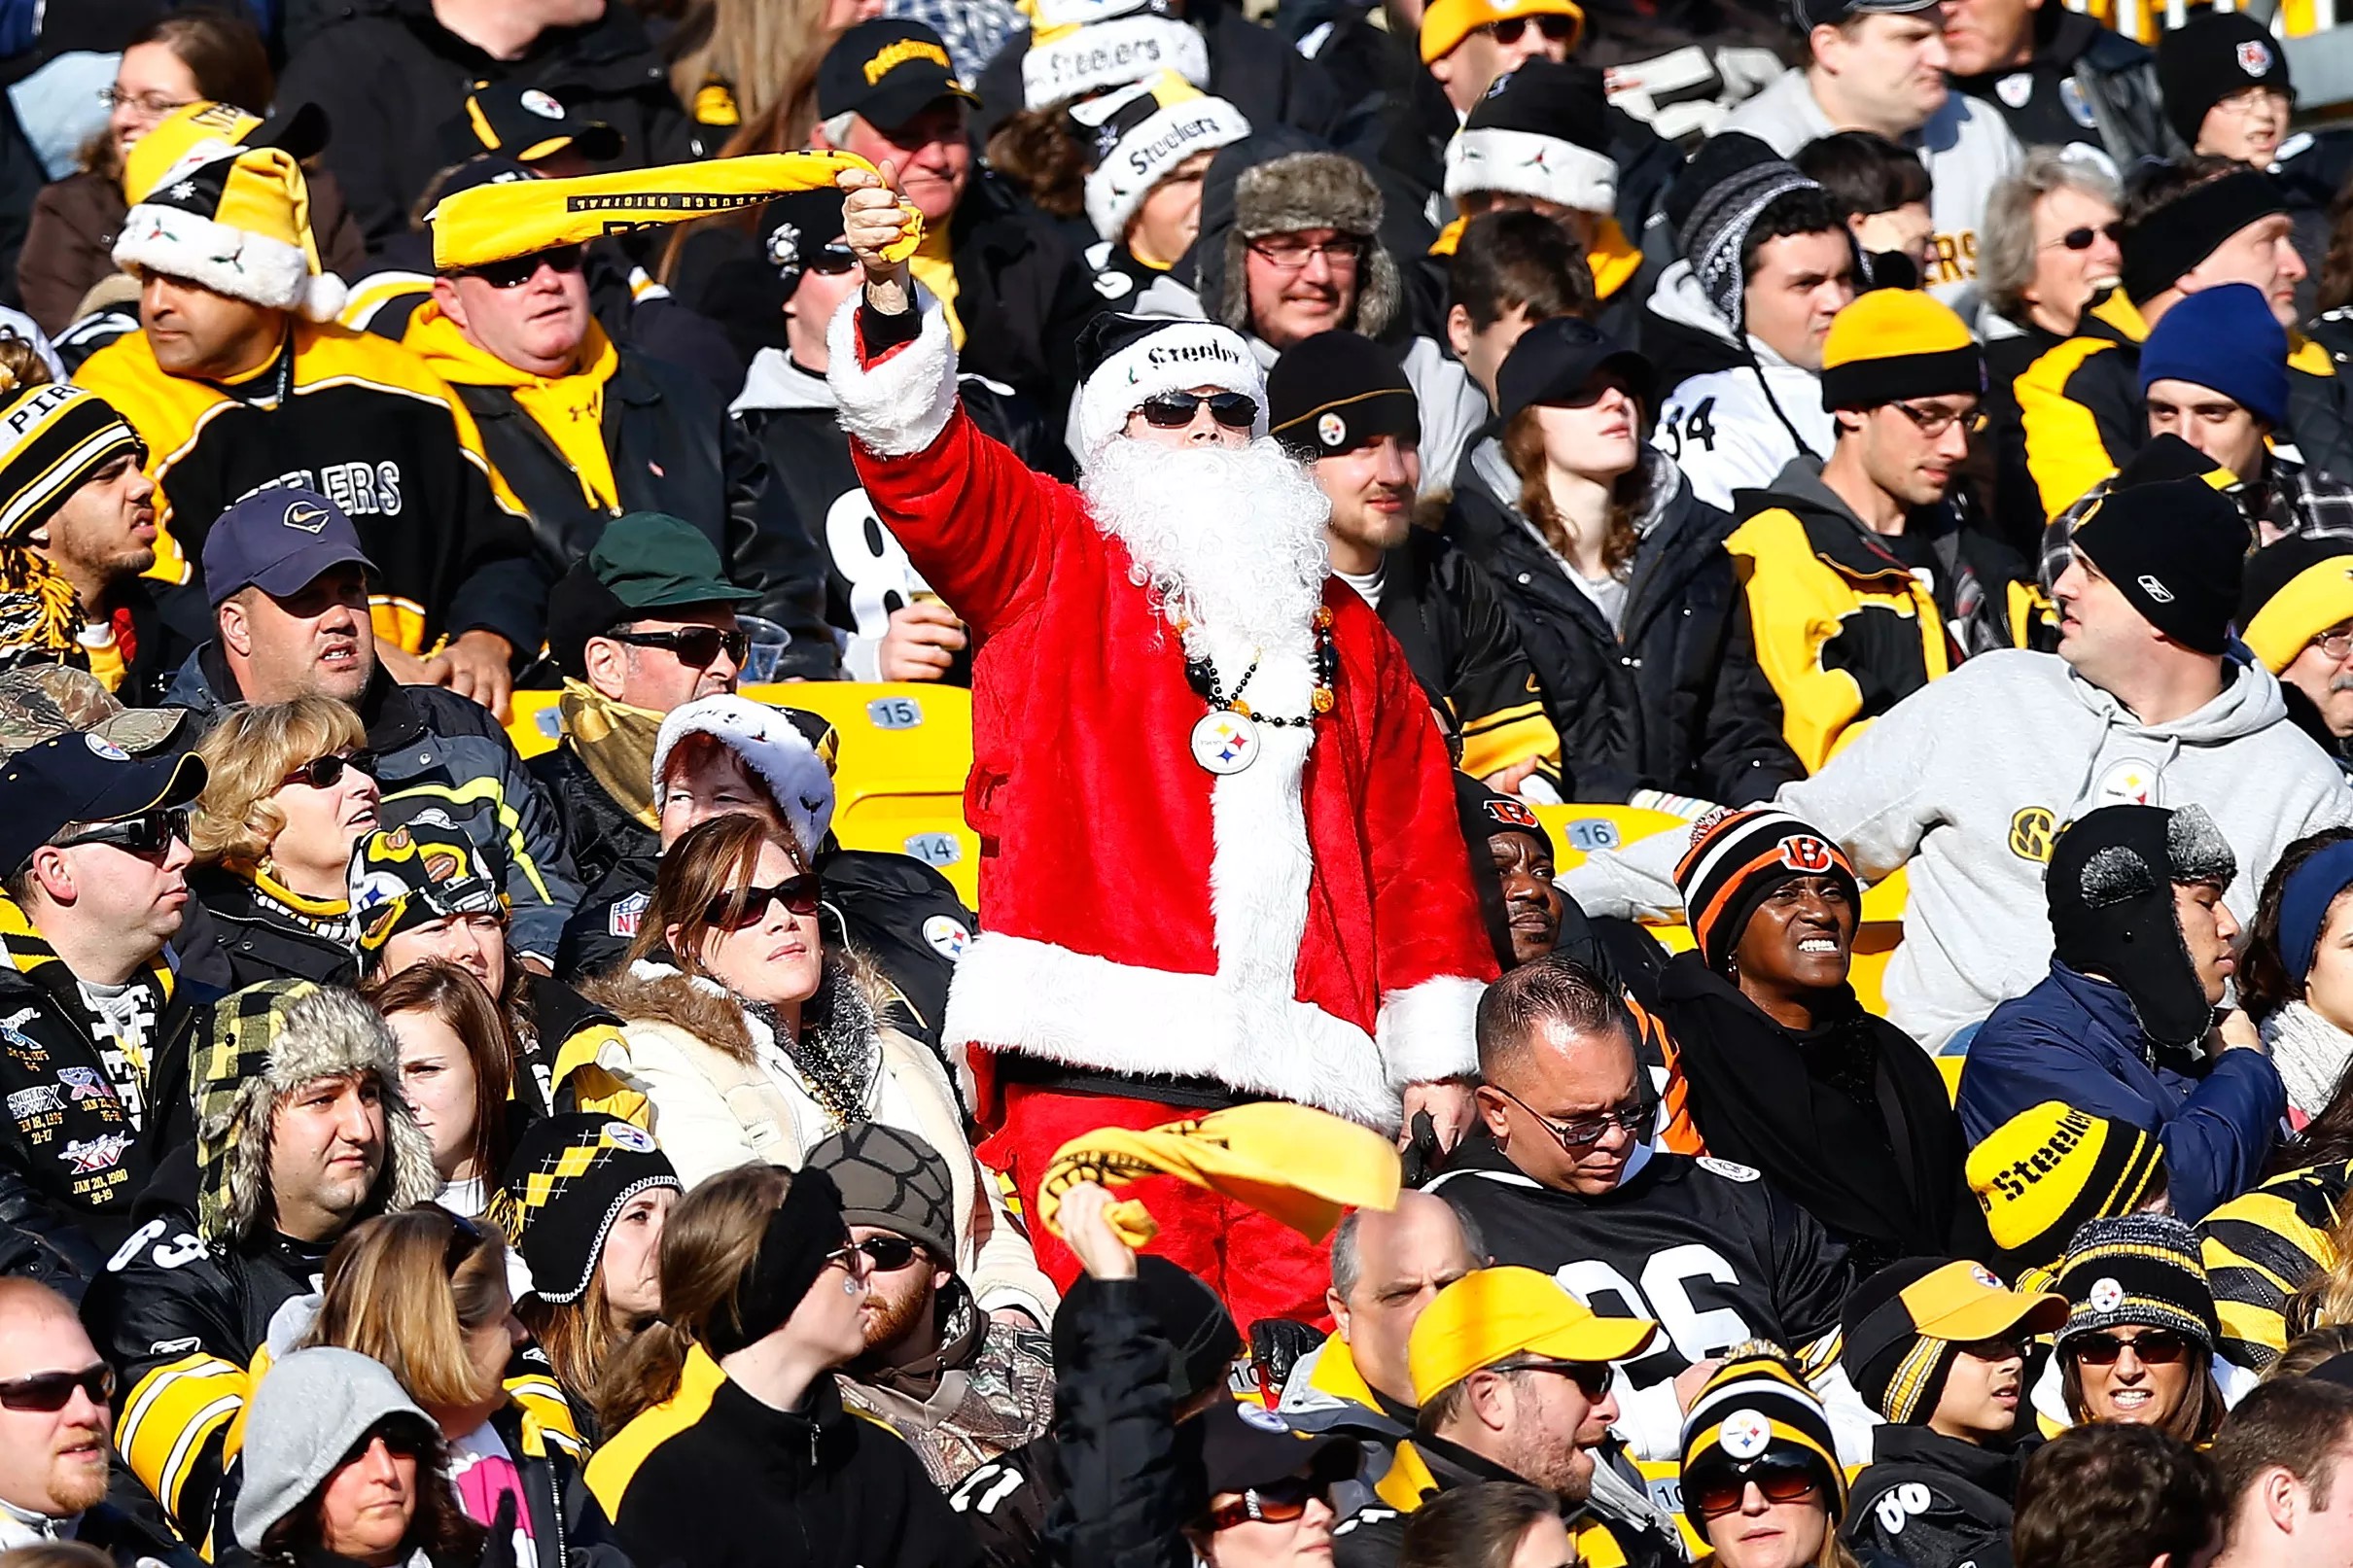 Merry Christmas, and Happy Holidays, to Steelers fans everywhere